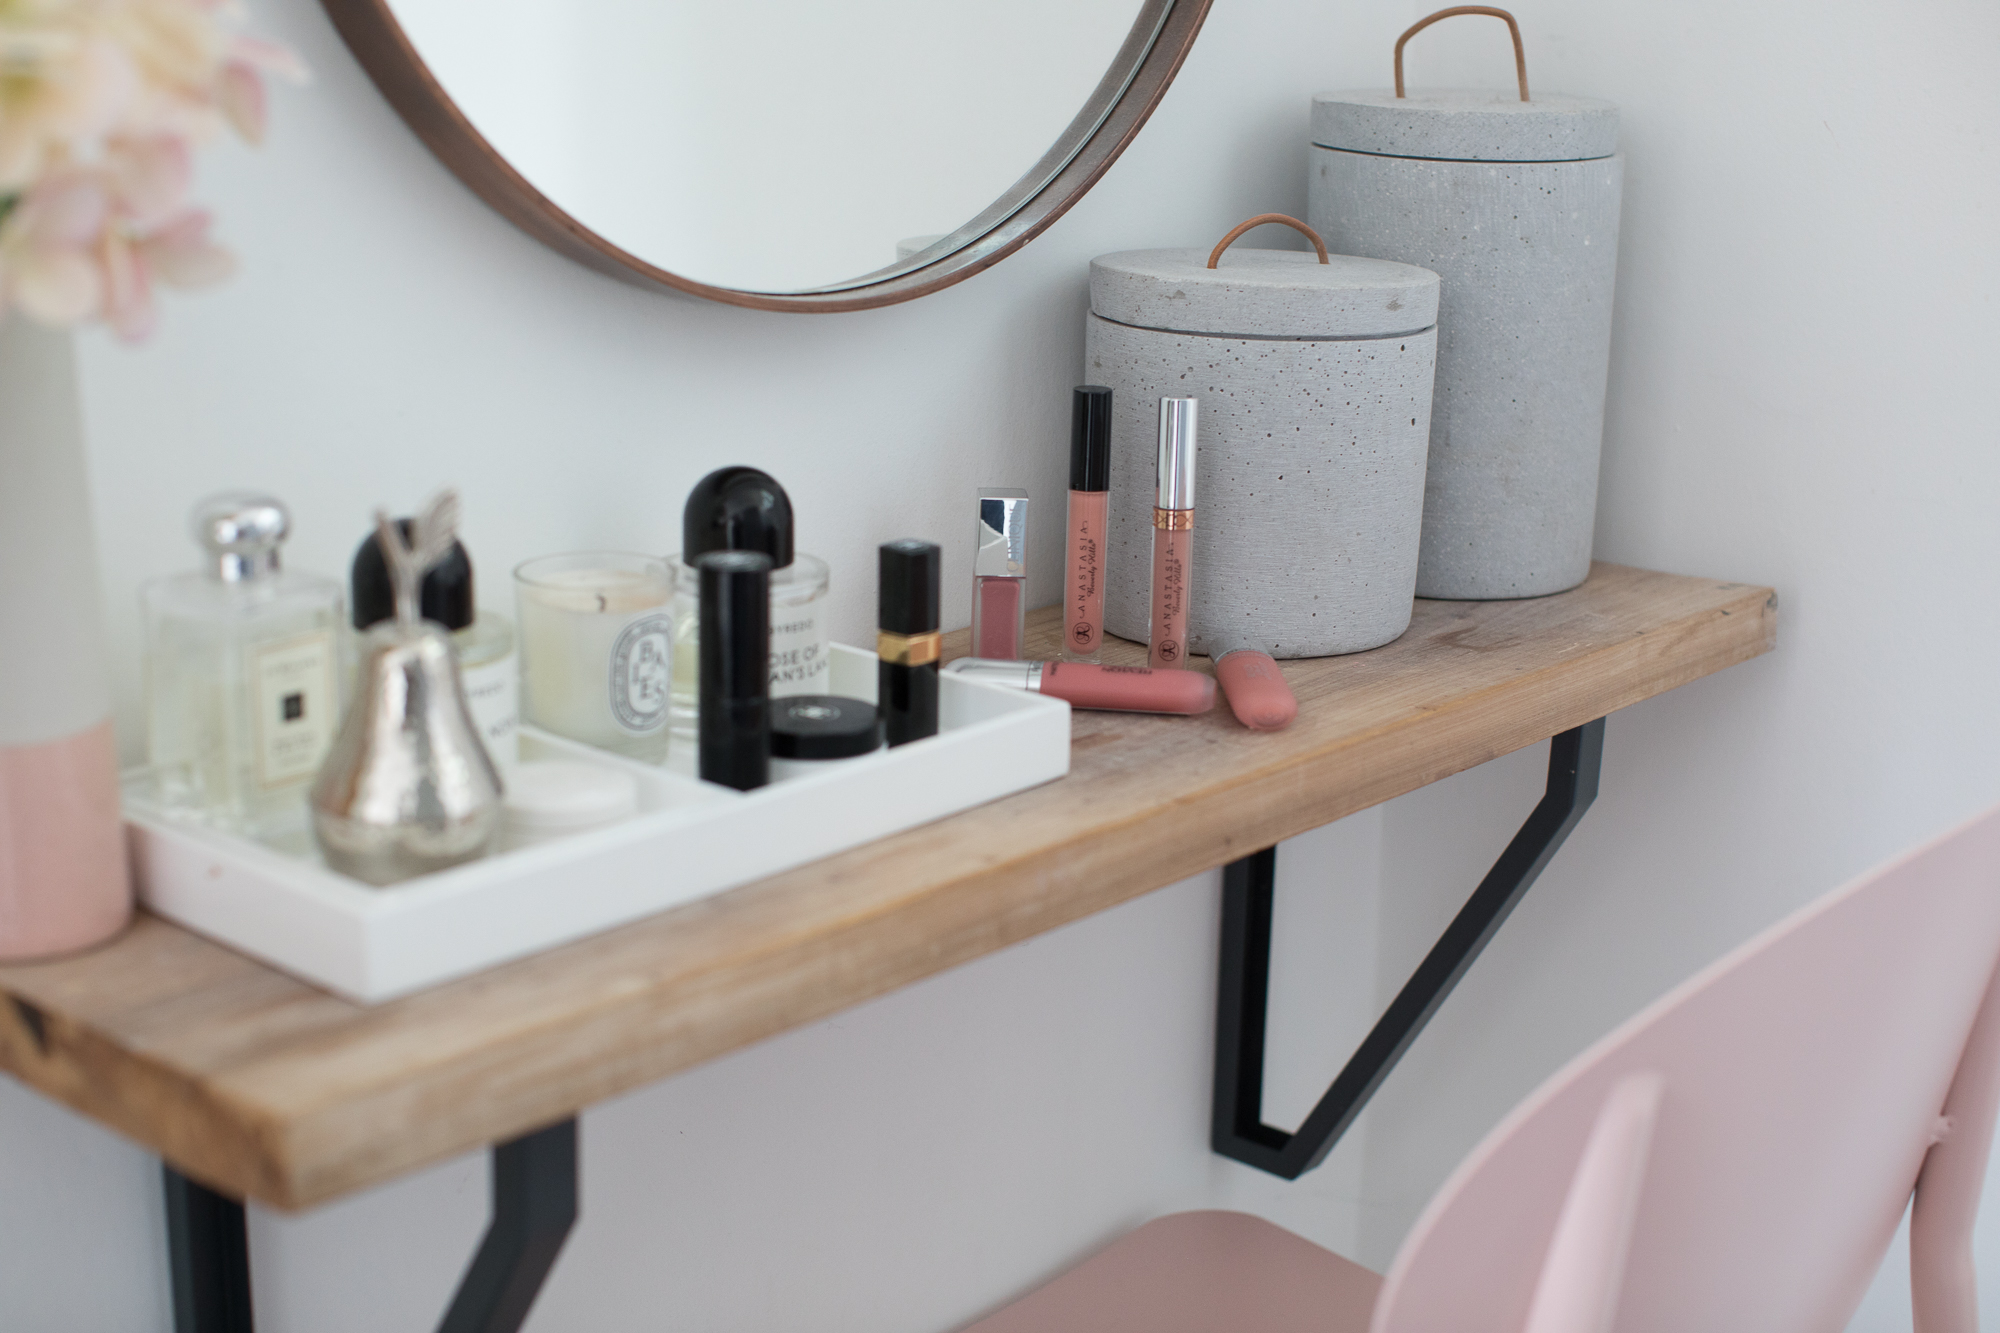 Shelf and mirror with make-up